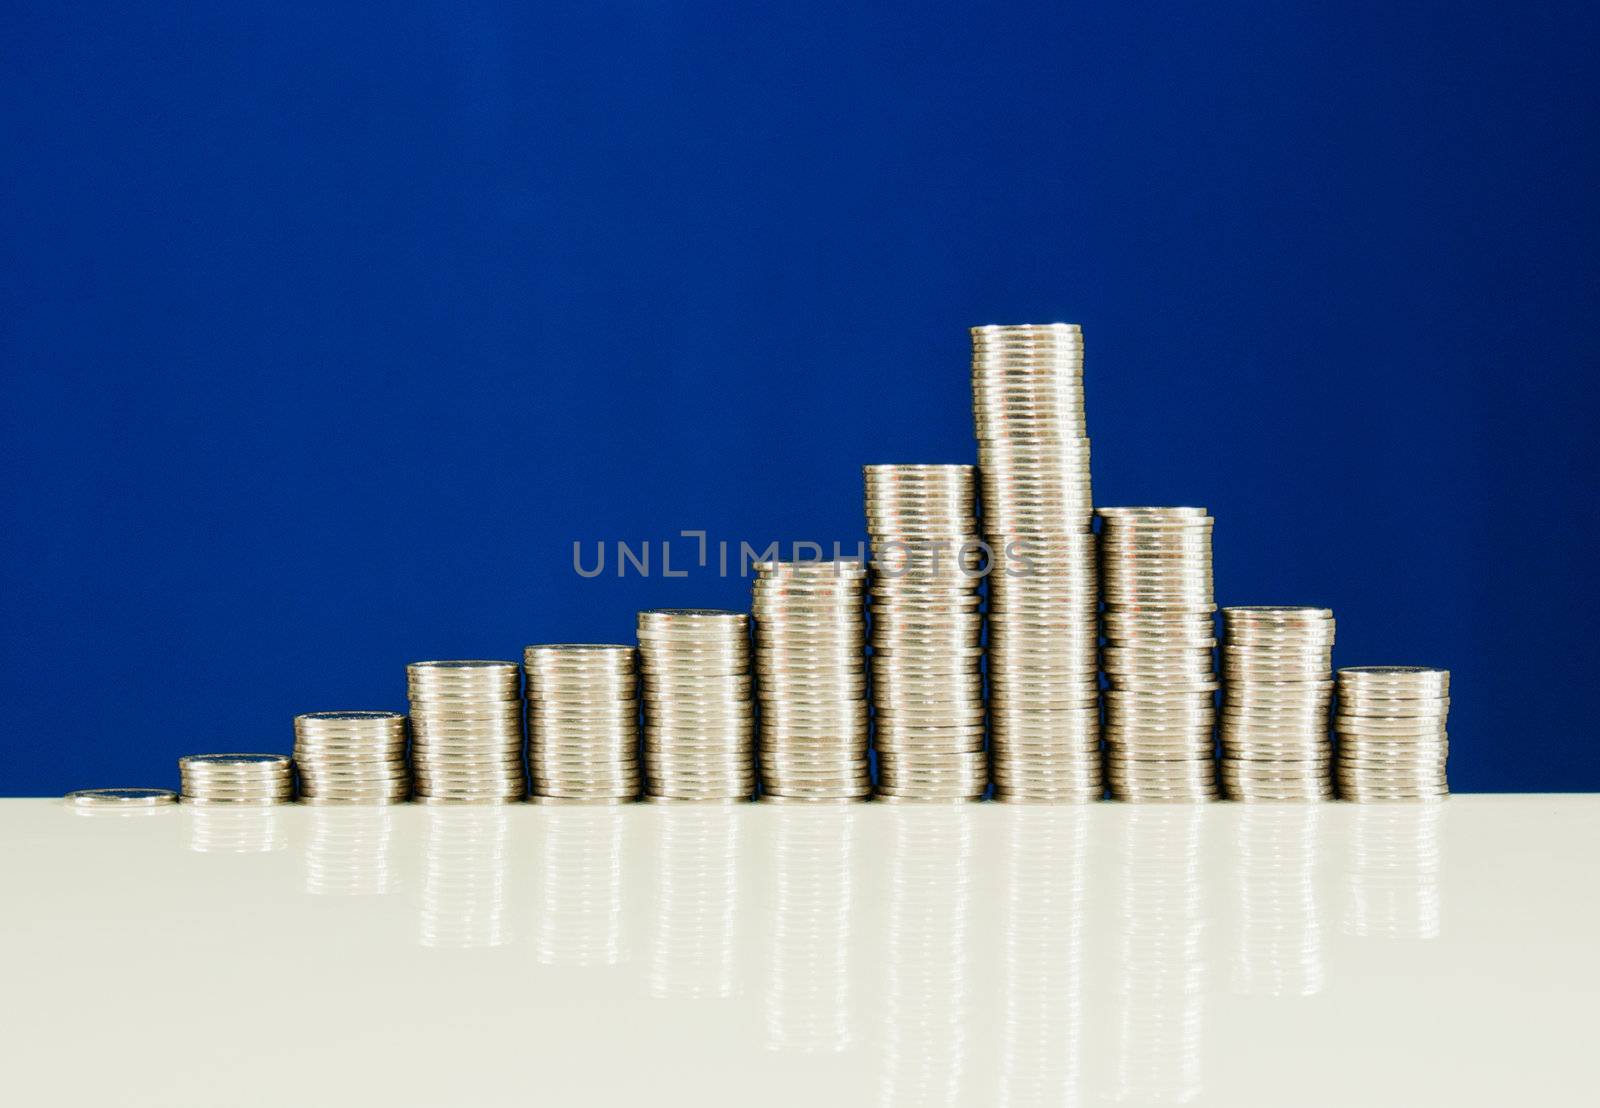 Coins stacked in bars against blue background - market grouth concept